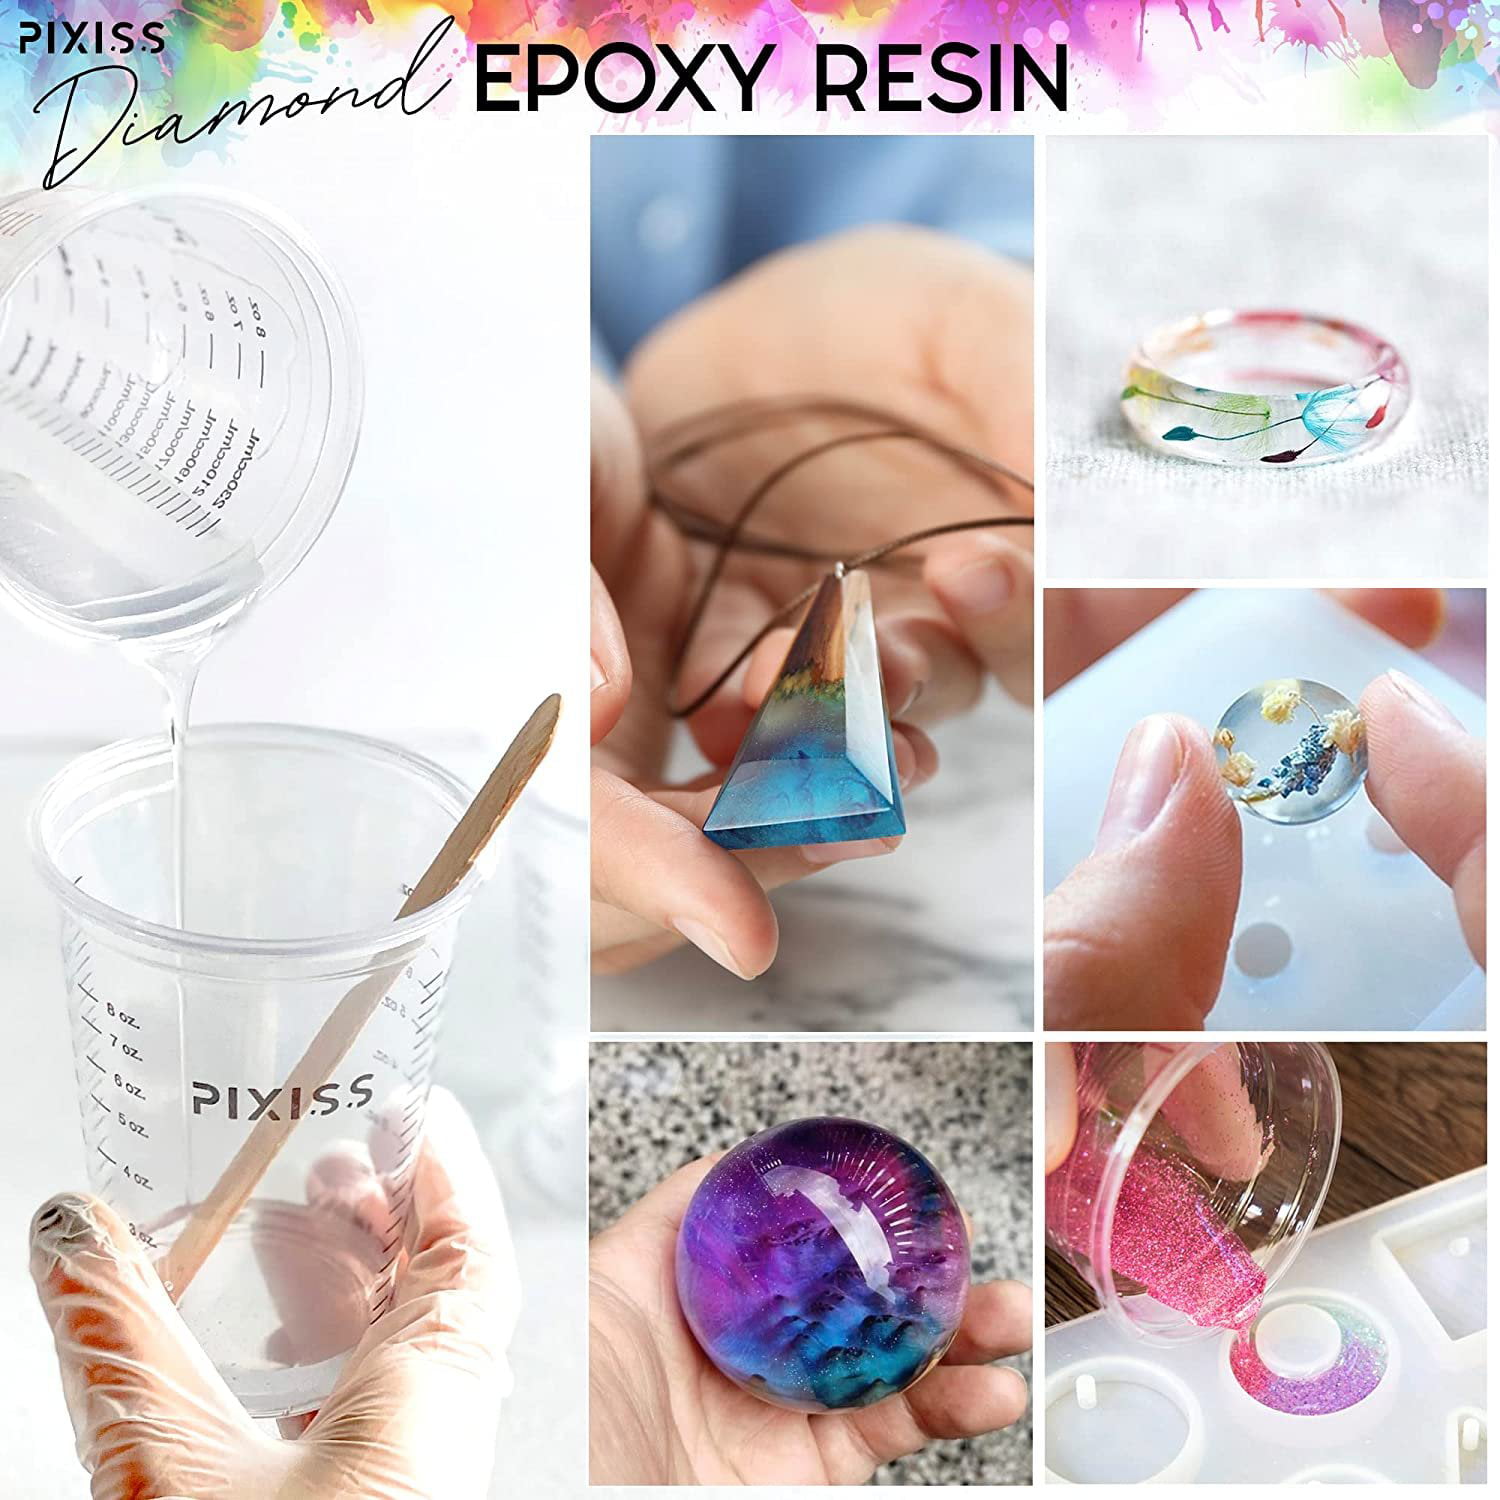 UpStart Epoxy Art Resin Epoxy Resin Kit - Made in USA - Ultra Crystal Clear Artist Resin - DIY Craft Resin for Jewelry, Mold Casting, Preserving